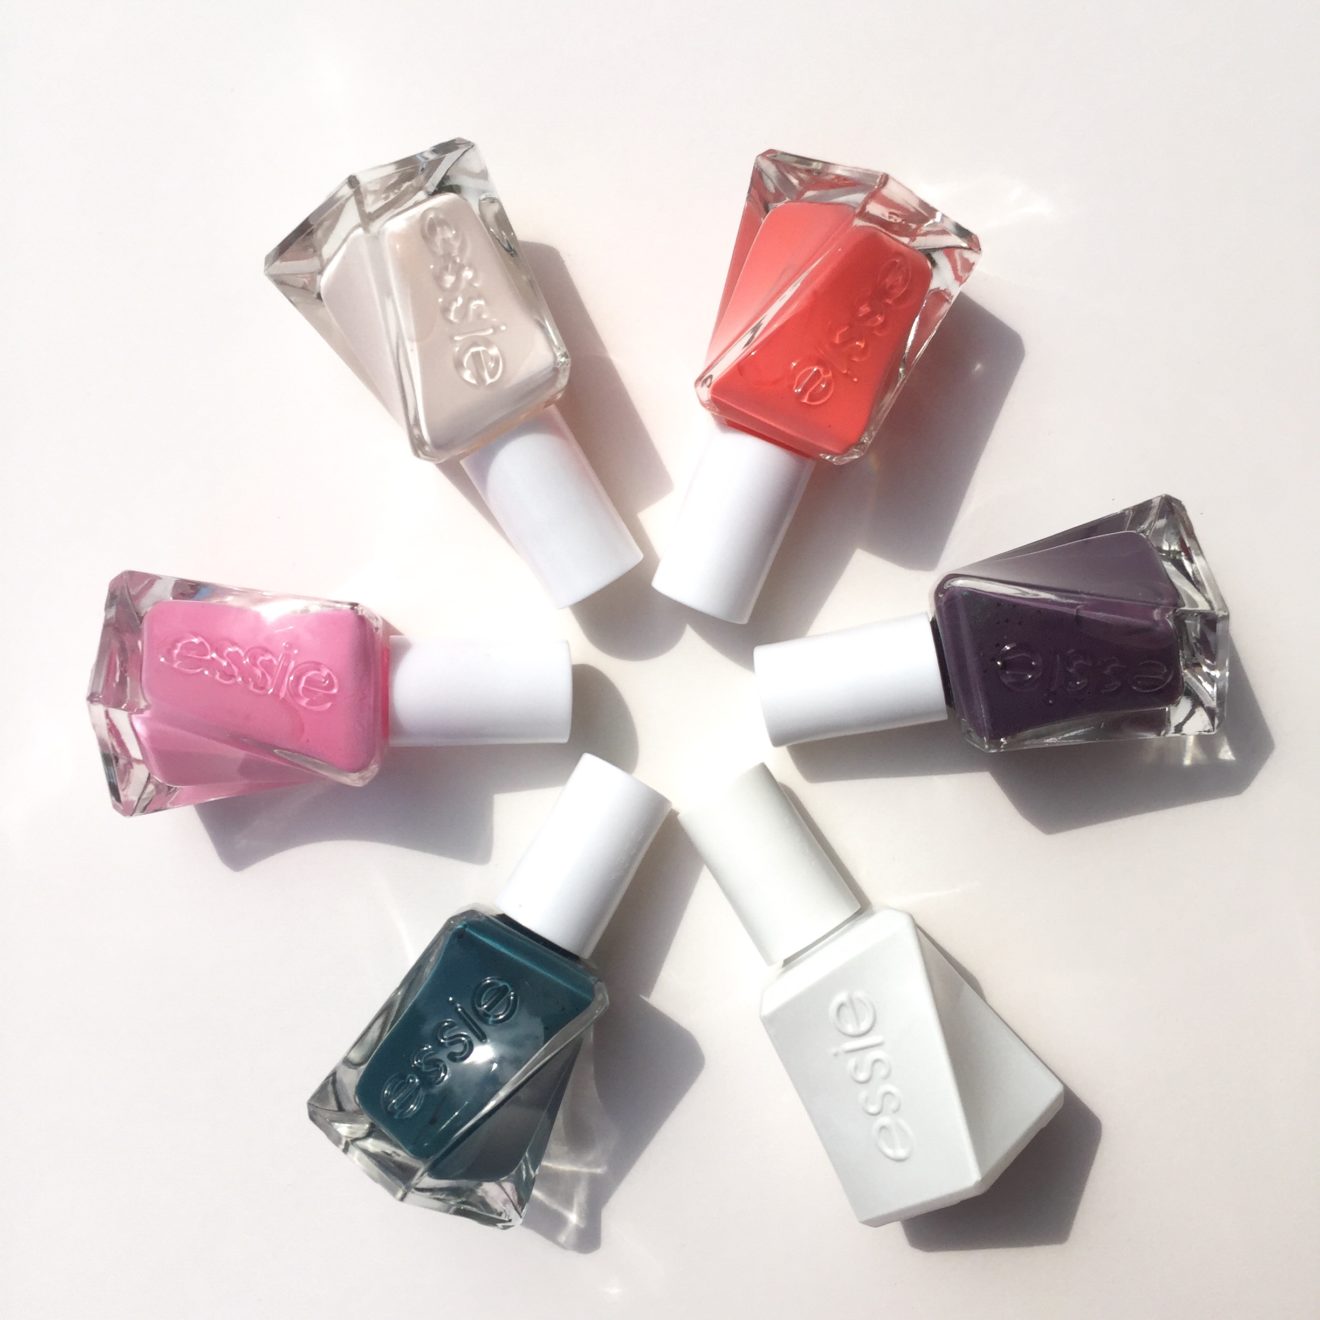 Essie Gel Couture: Gorgeous Shades In A Gel Formula You Can Apply Yourself!